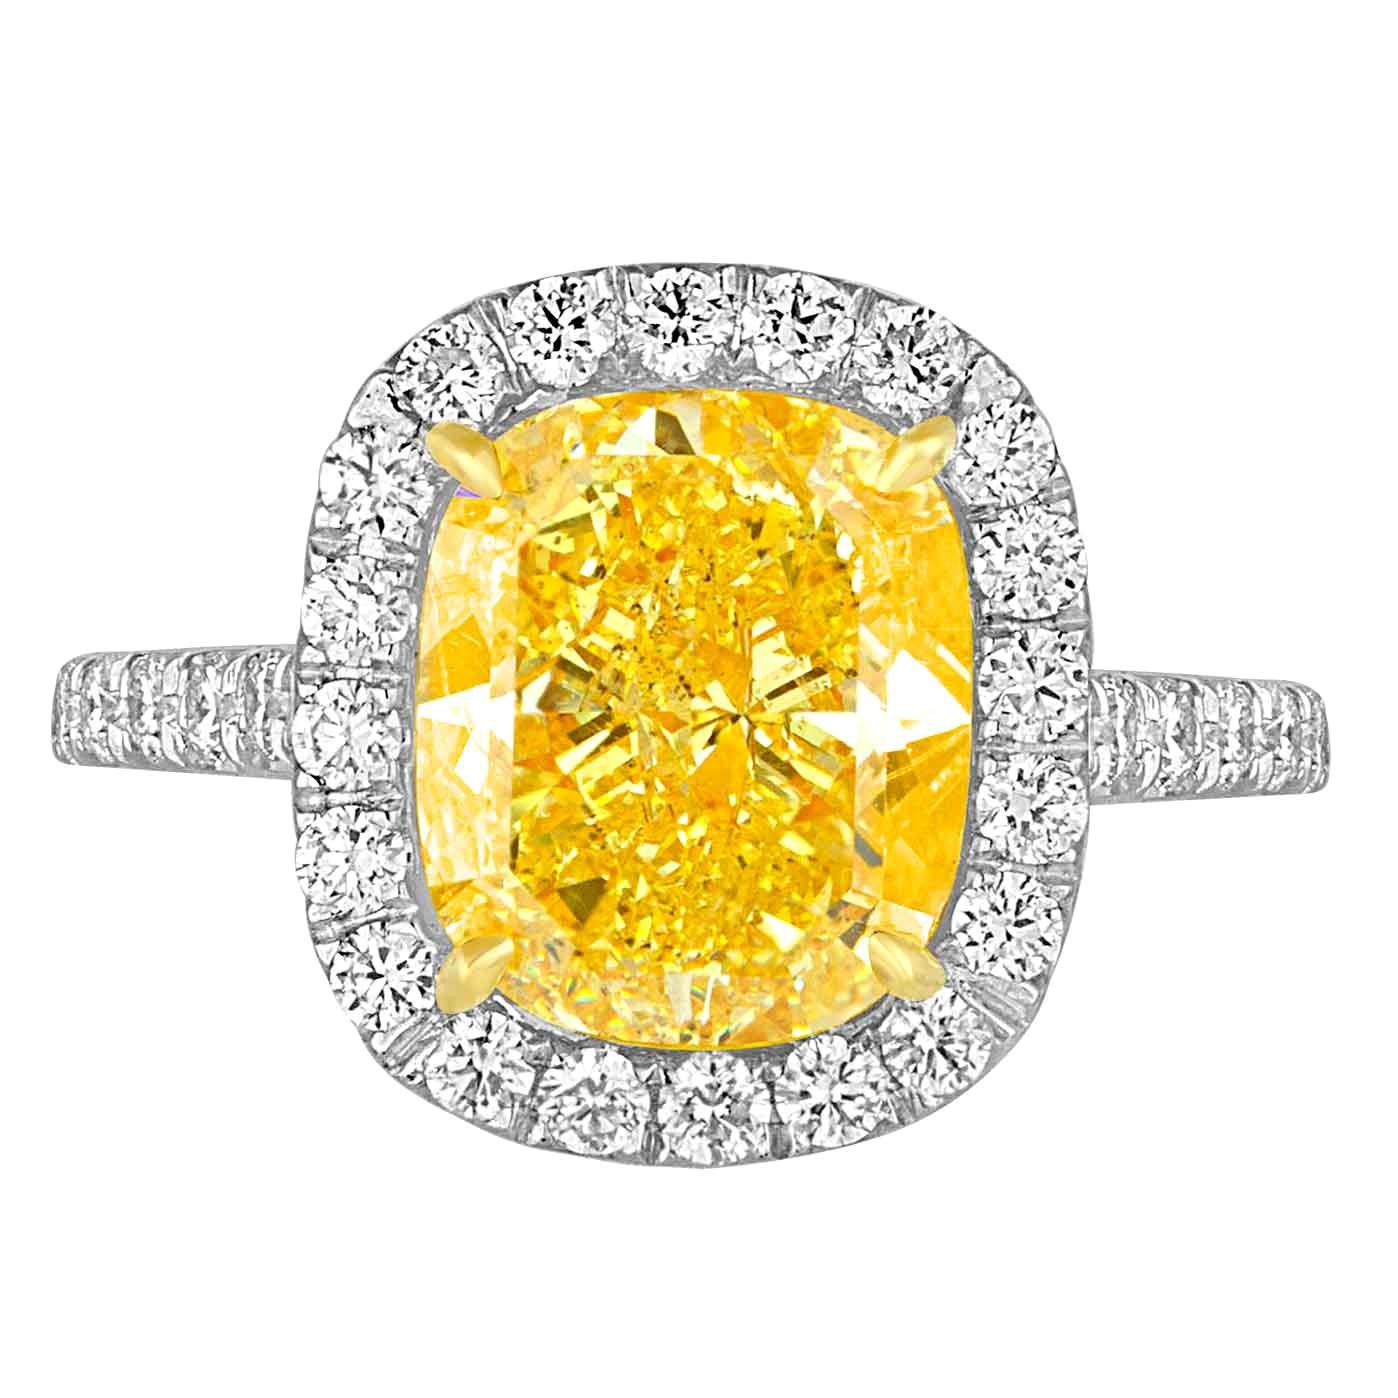 4.76 Carat Cushion GIA Certified Fancy Vivid Yellow Diamond Two Color Gold Ring For Sale